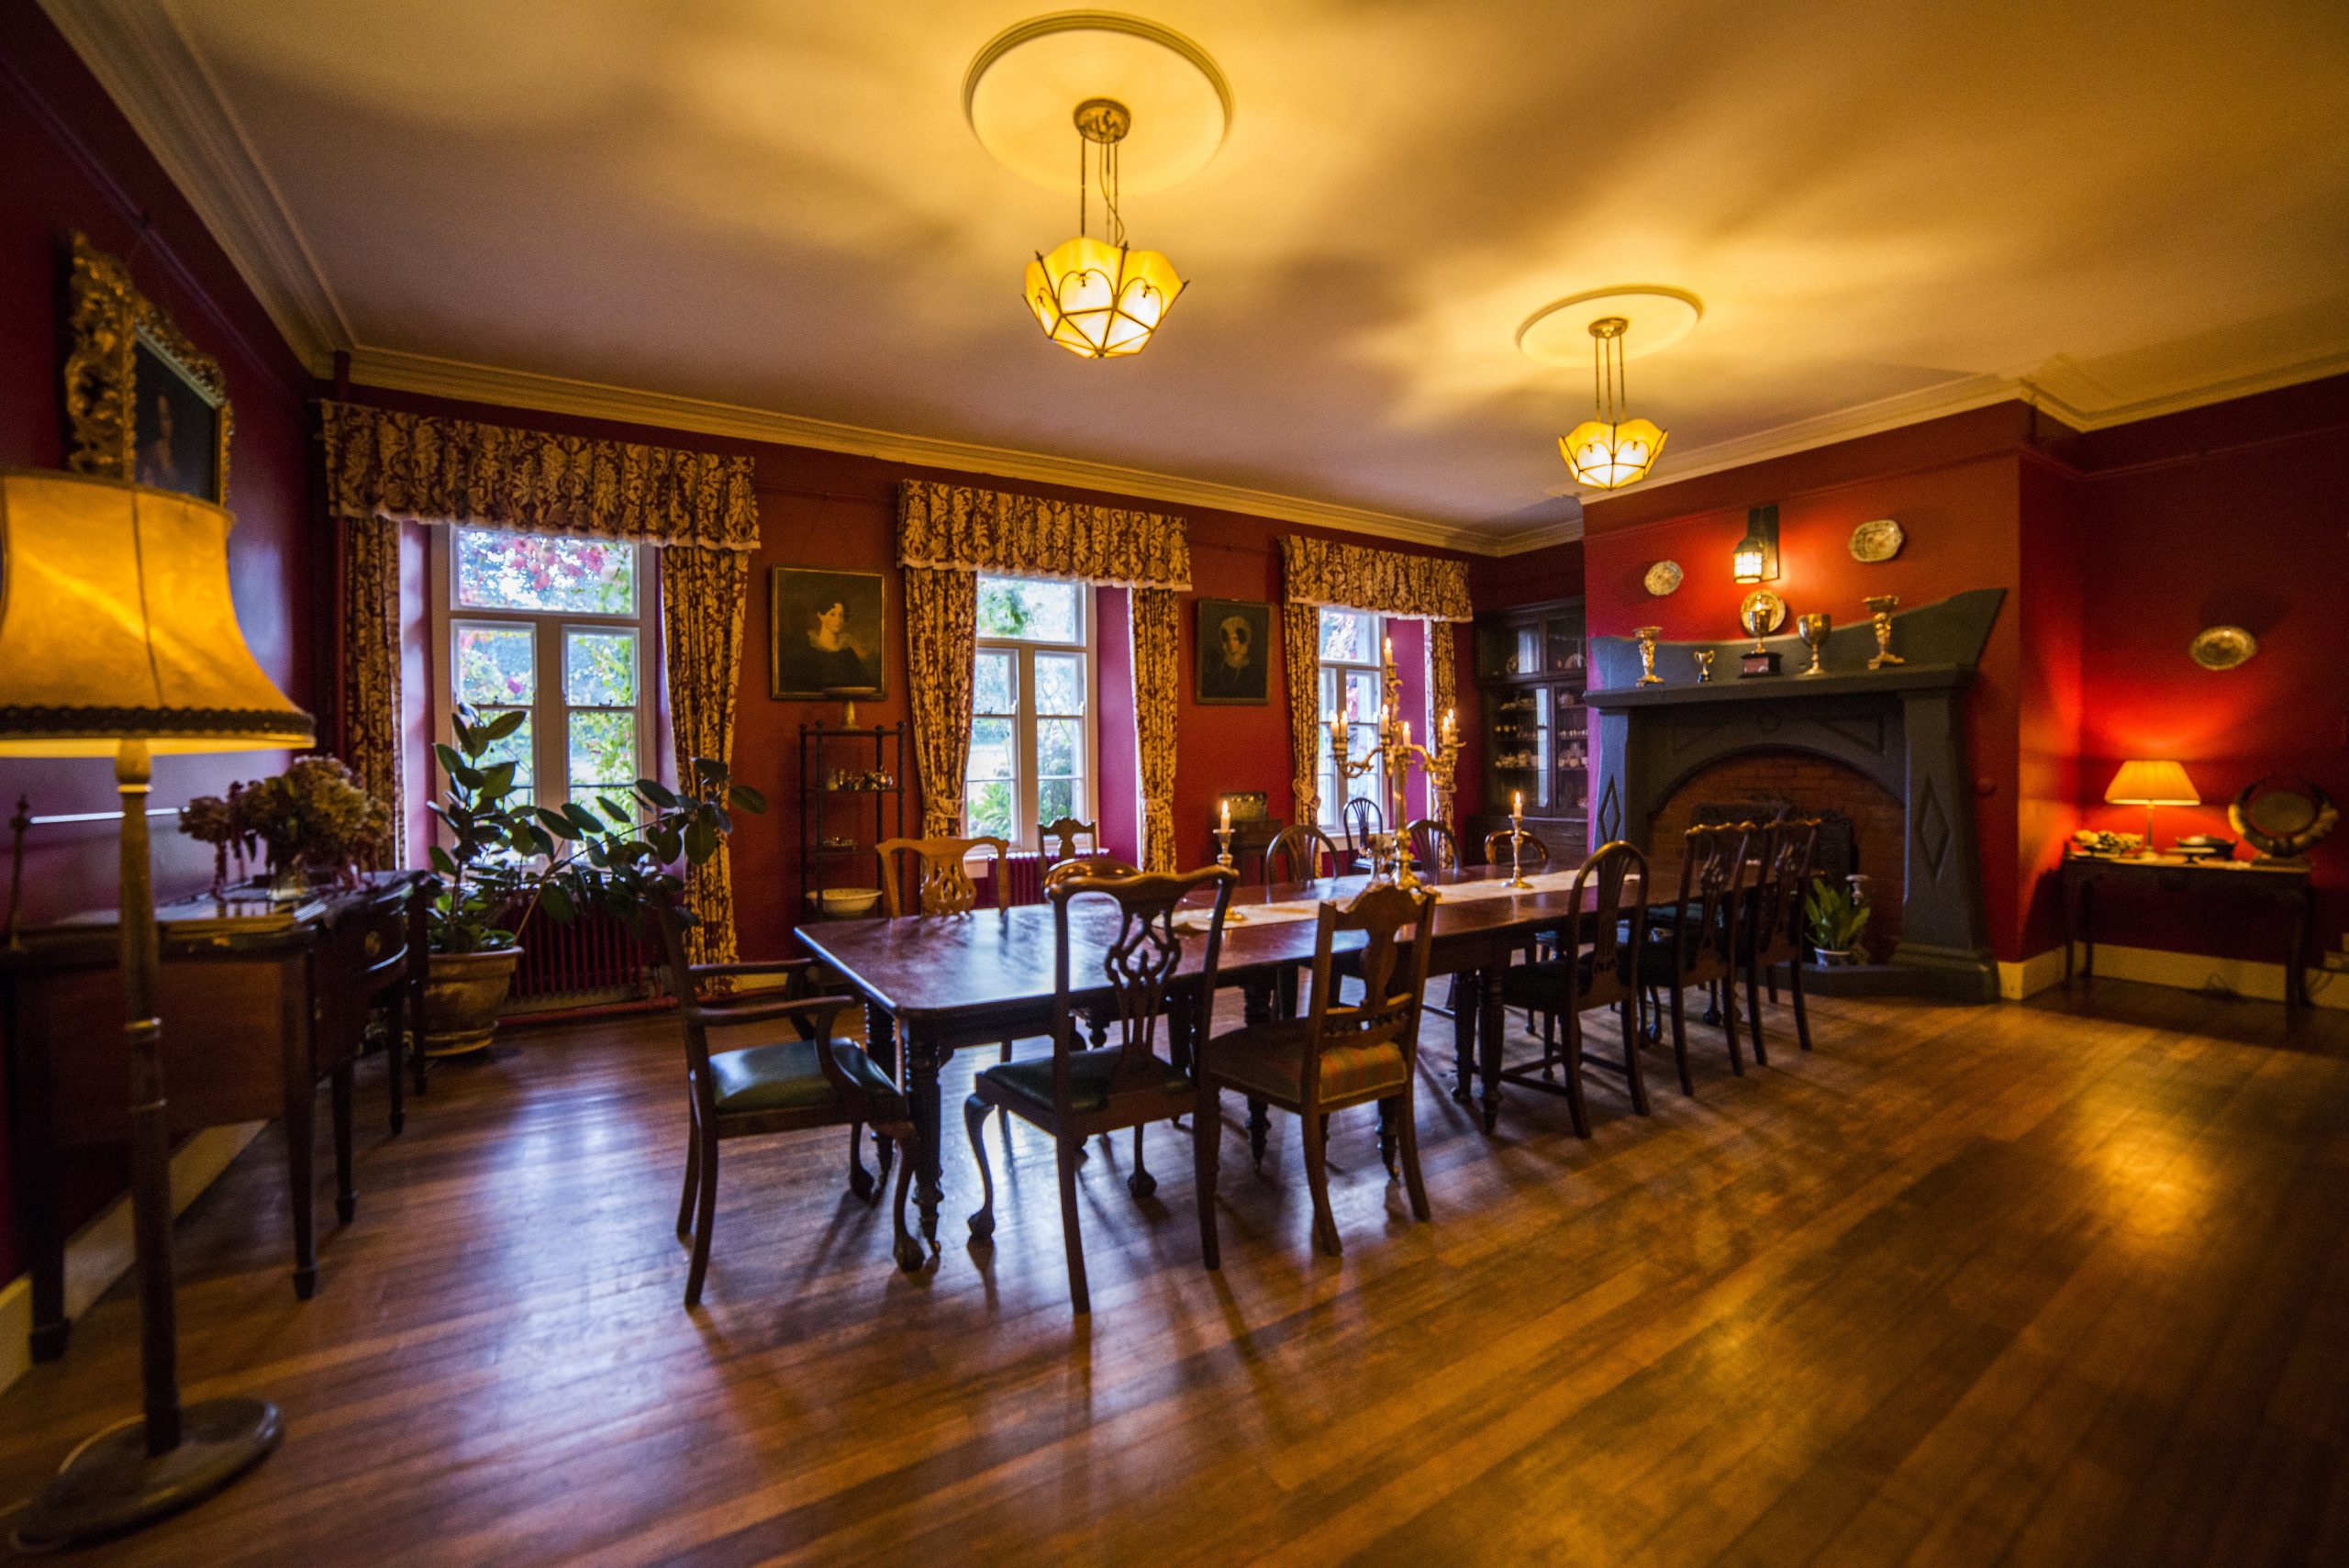 Castle dining room